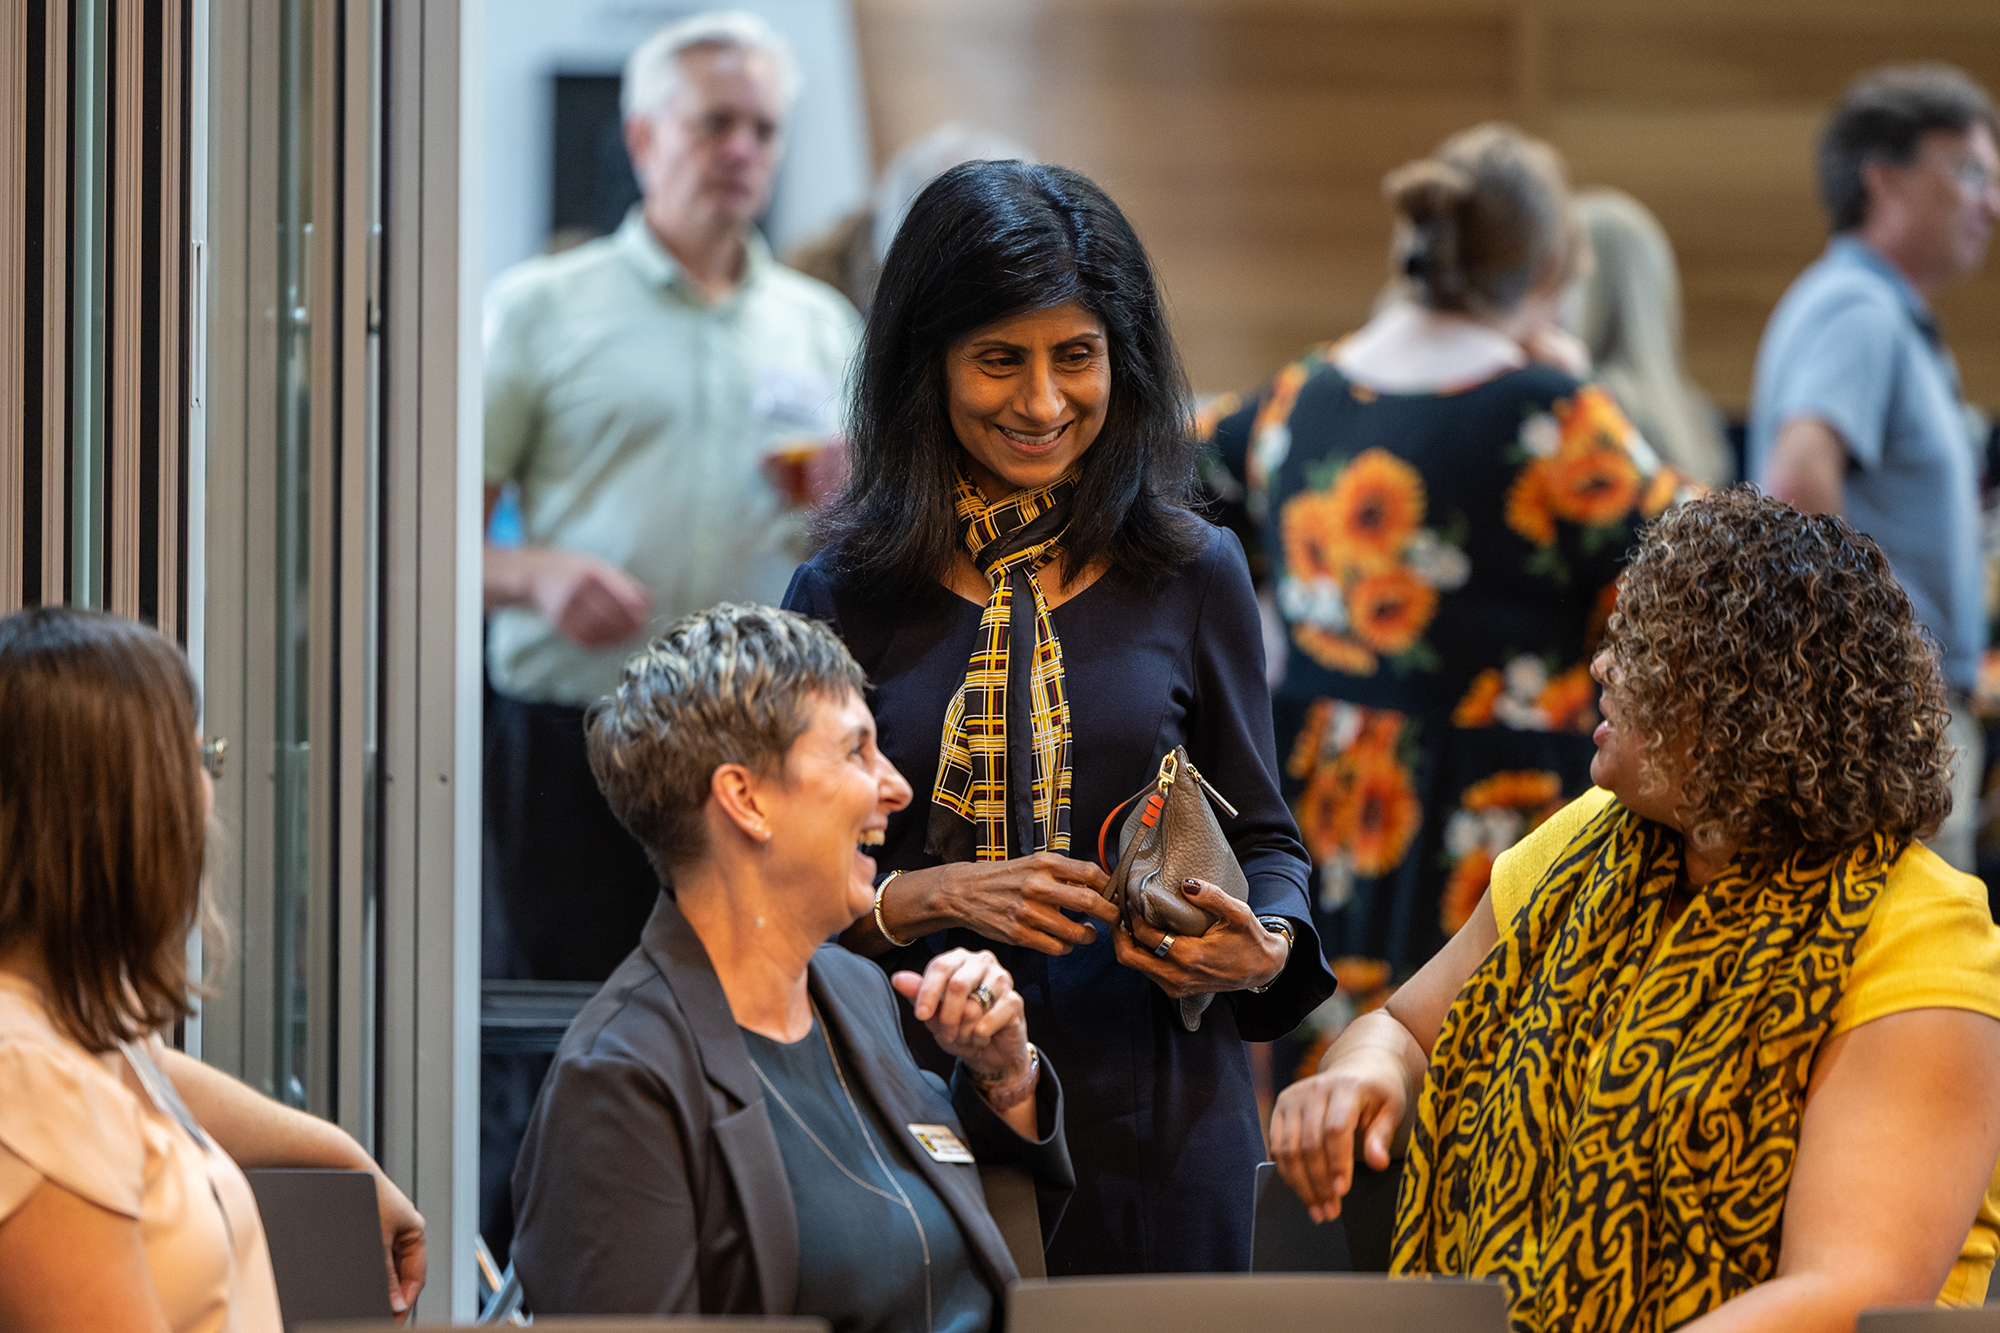 MU Provost and Executive Vice Chancellor for Academic Affairs Latha Ramchand visits with guests during the Center for the Humanities launch at the State Historical Society of Missouri.